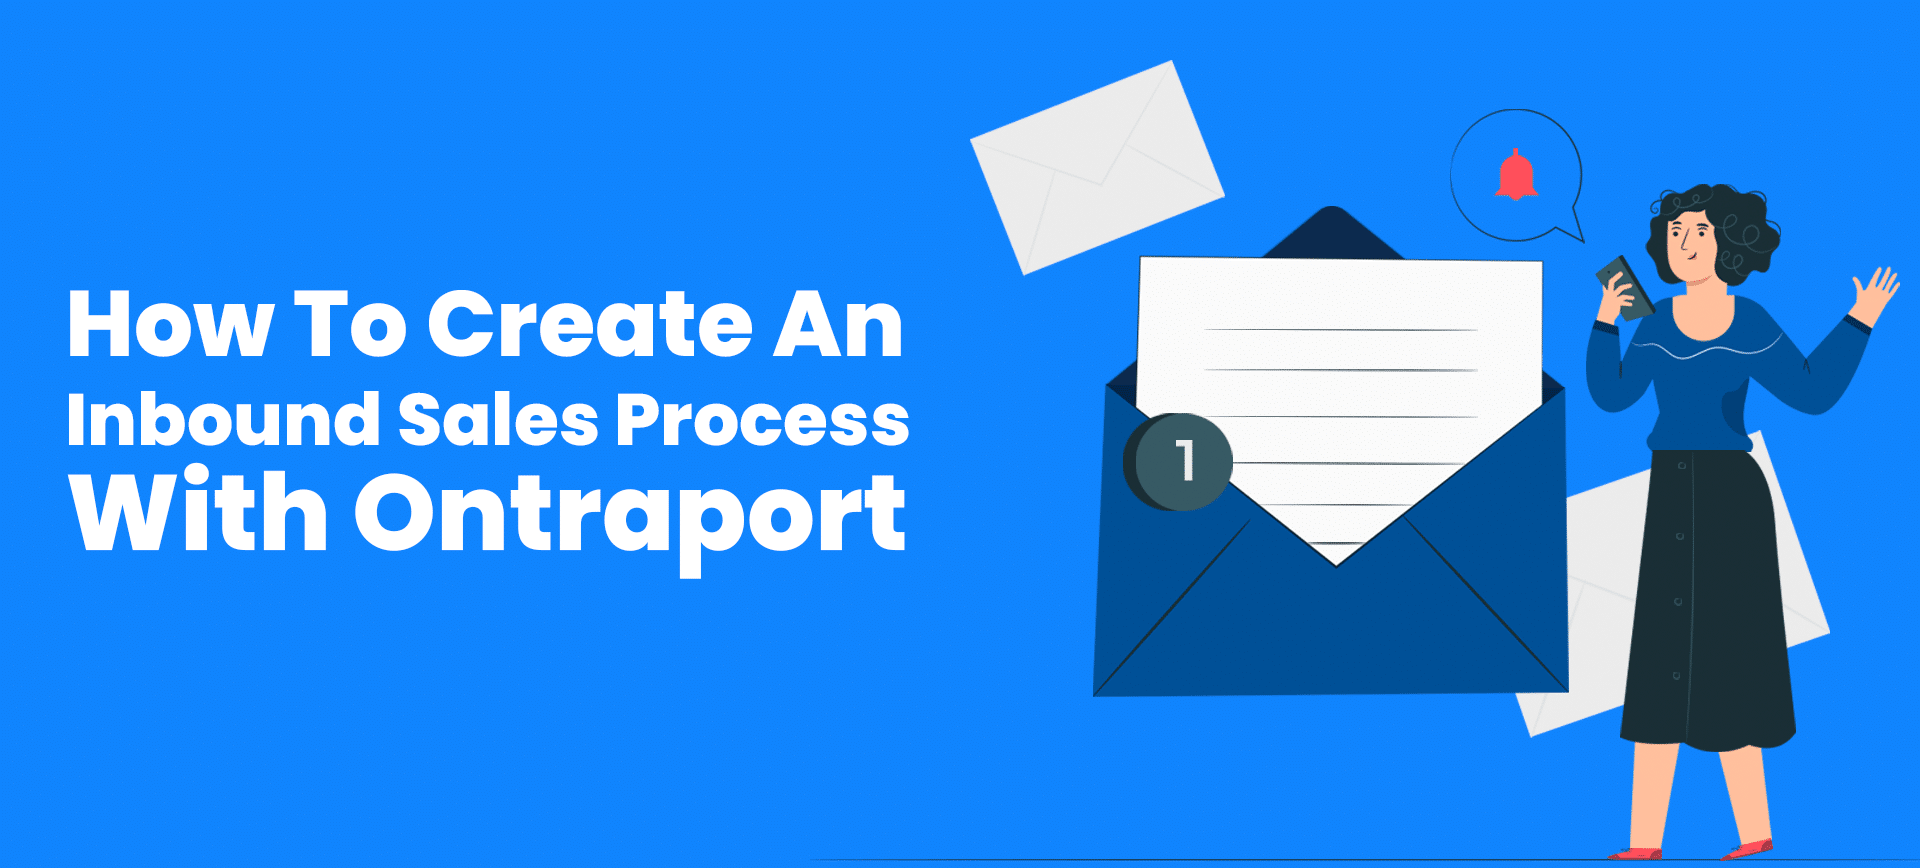 How To Create An Inbound Sales Process With Ontraport